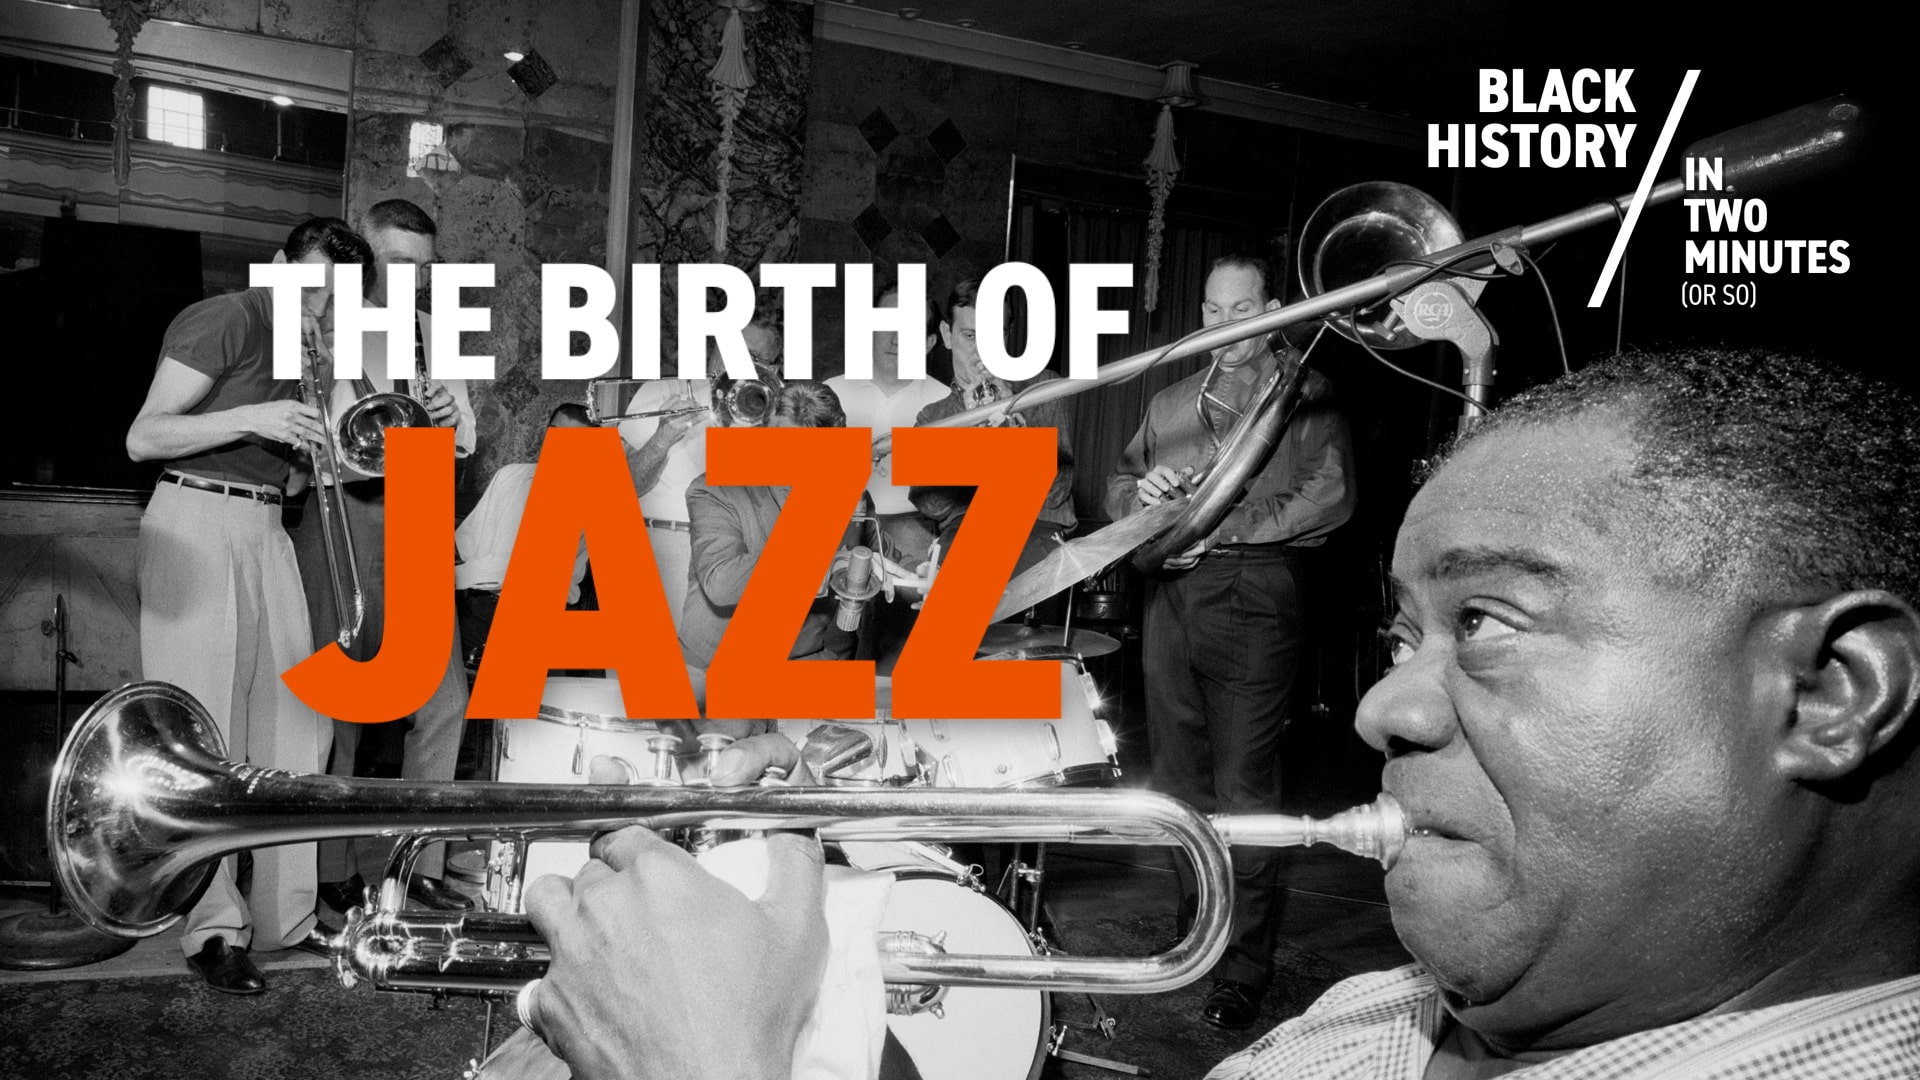 The Birth of JazzAffirmative Action | Black History in Two Minutes